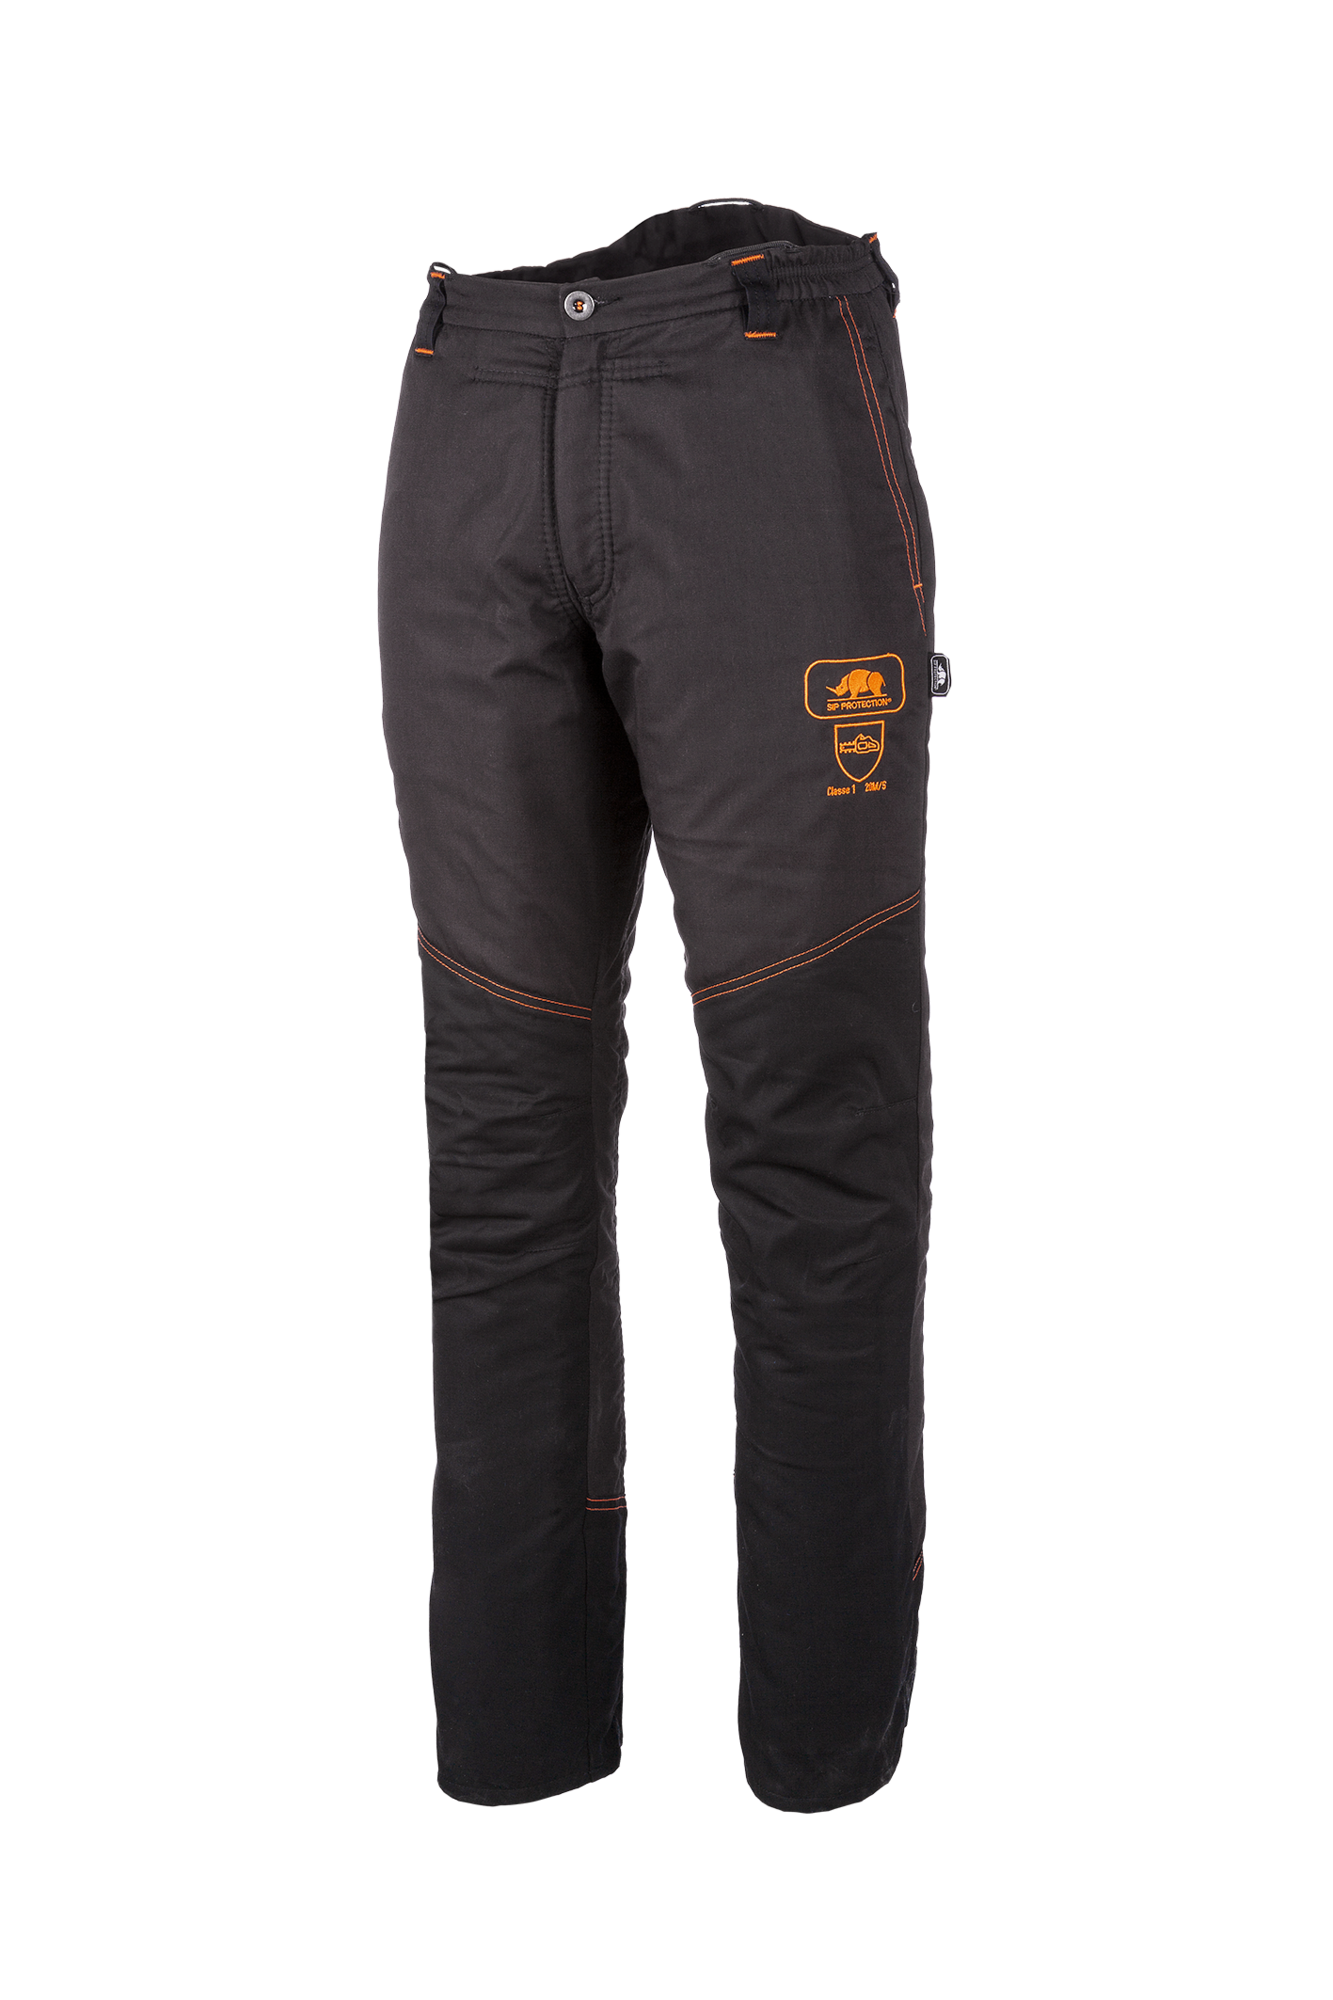 SIP Protection Perthus BasePro Chainsaw Trousers Class 1 Type A